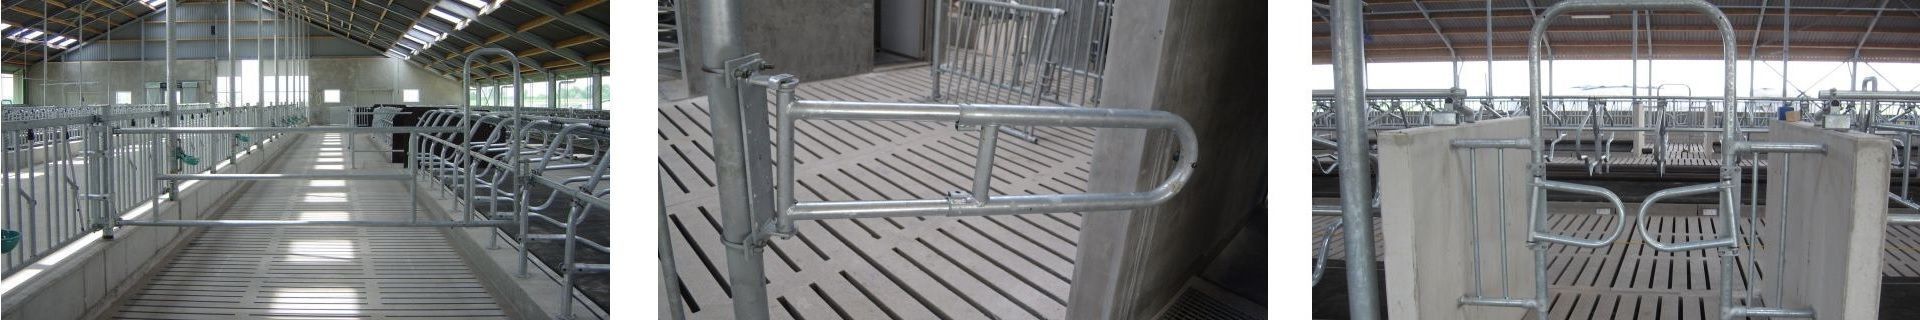 Spinder partition barriers Texas gate